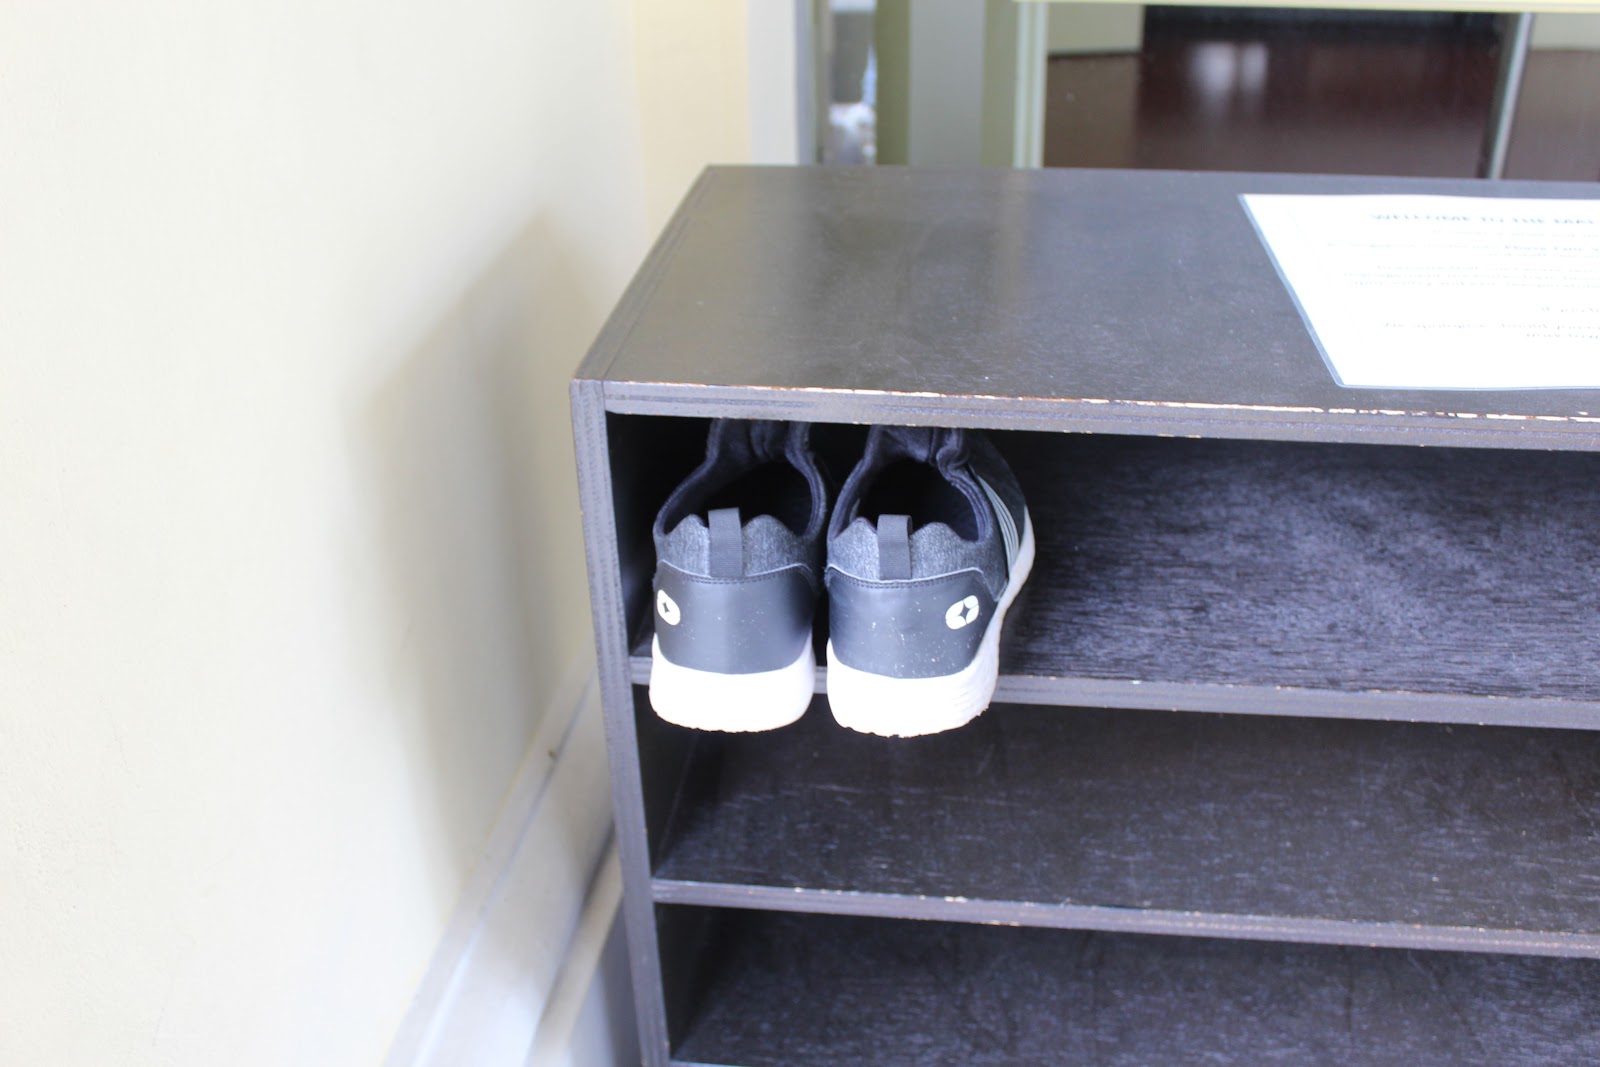 Shelves with a shoe placed inside it